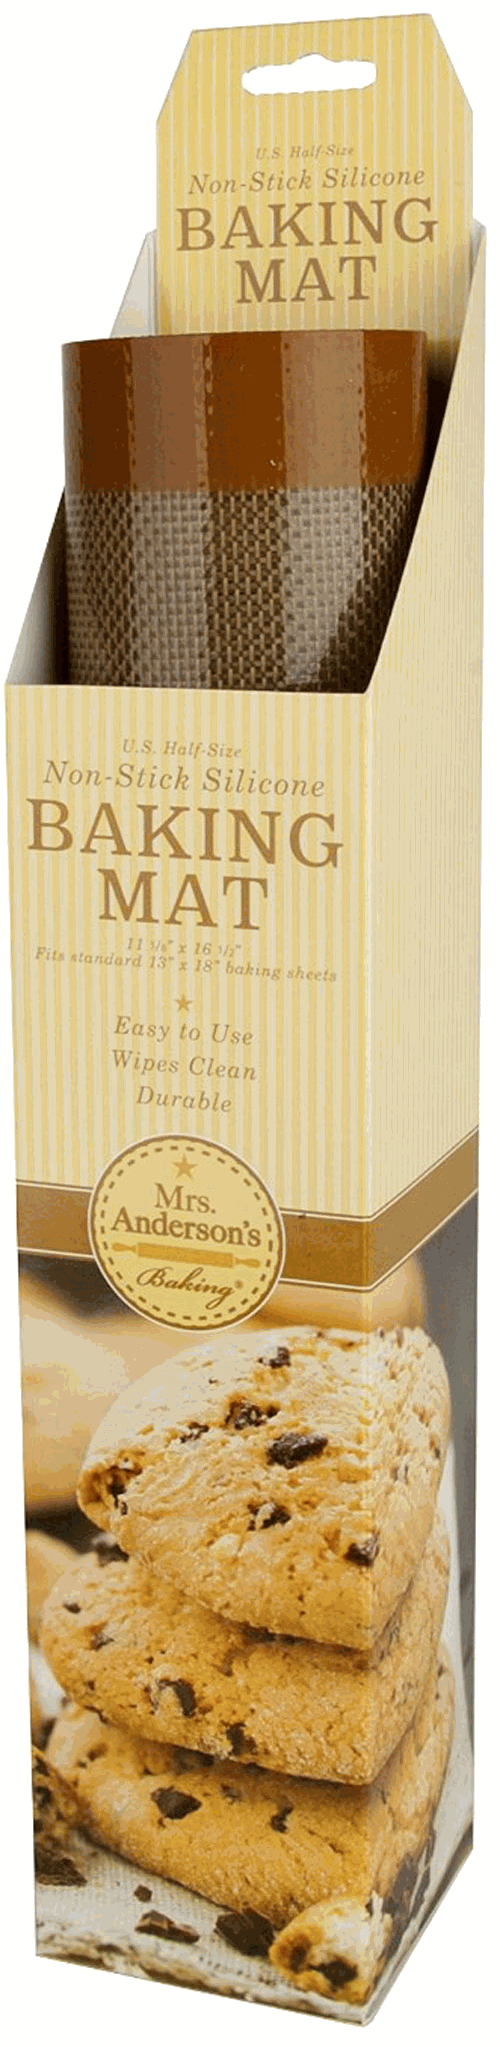 Mrs. Anderson's Baking Magnetic Measuring Spoon Set — KitchenKapers